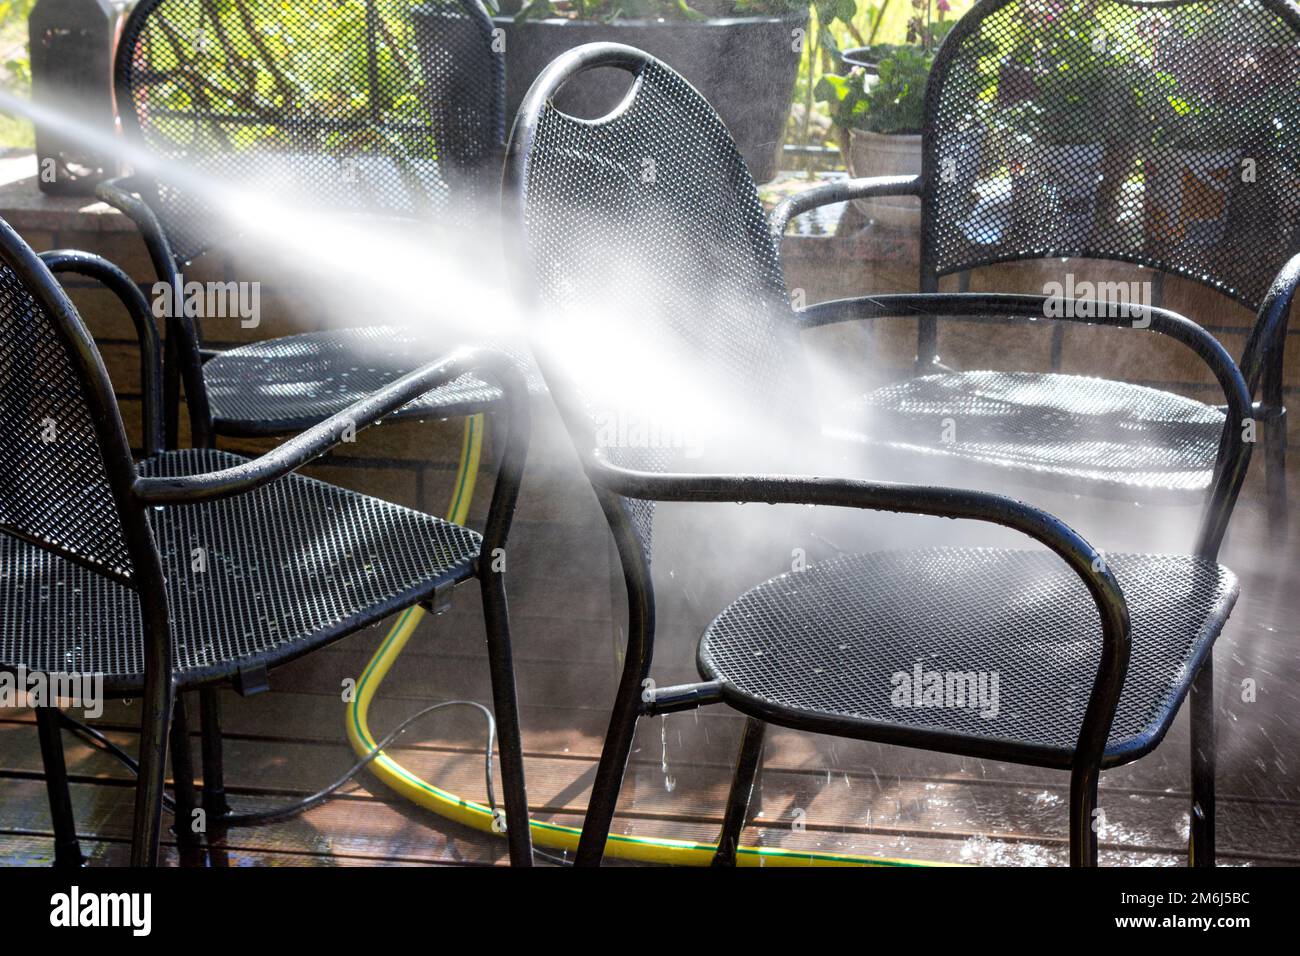 Power surface washing. Man cleaning terrace with a power washer. High water pressure cleaner on wooden terrace surface and outdoor furniture. Stock Photo